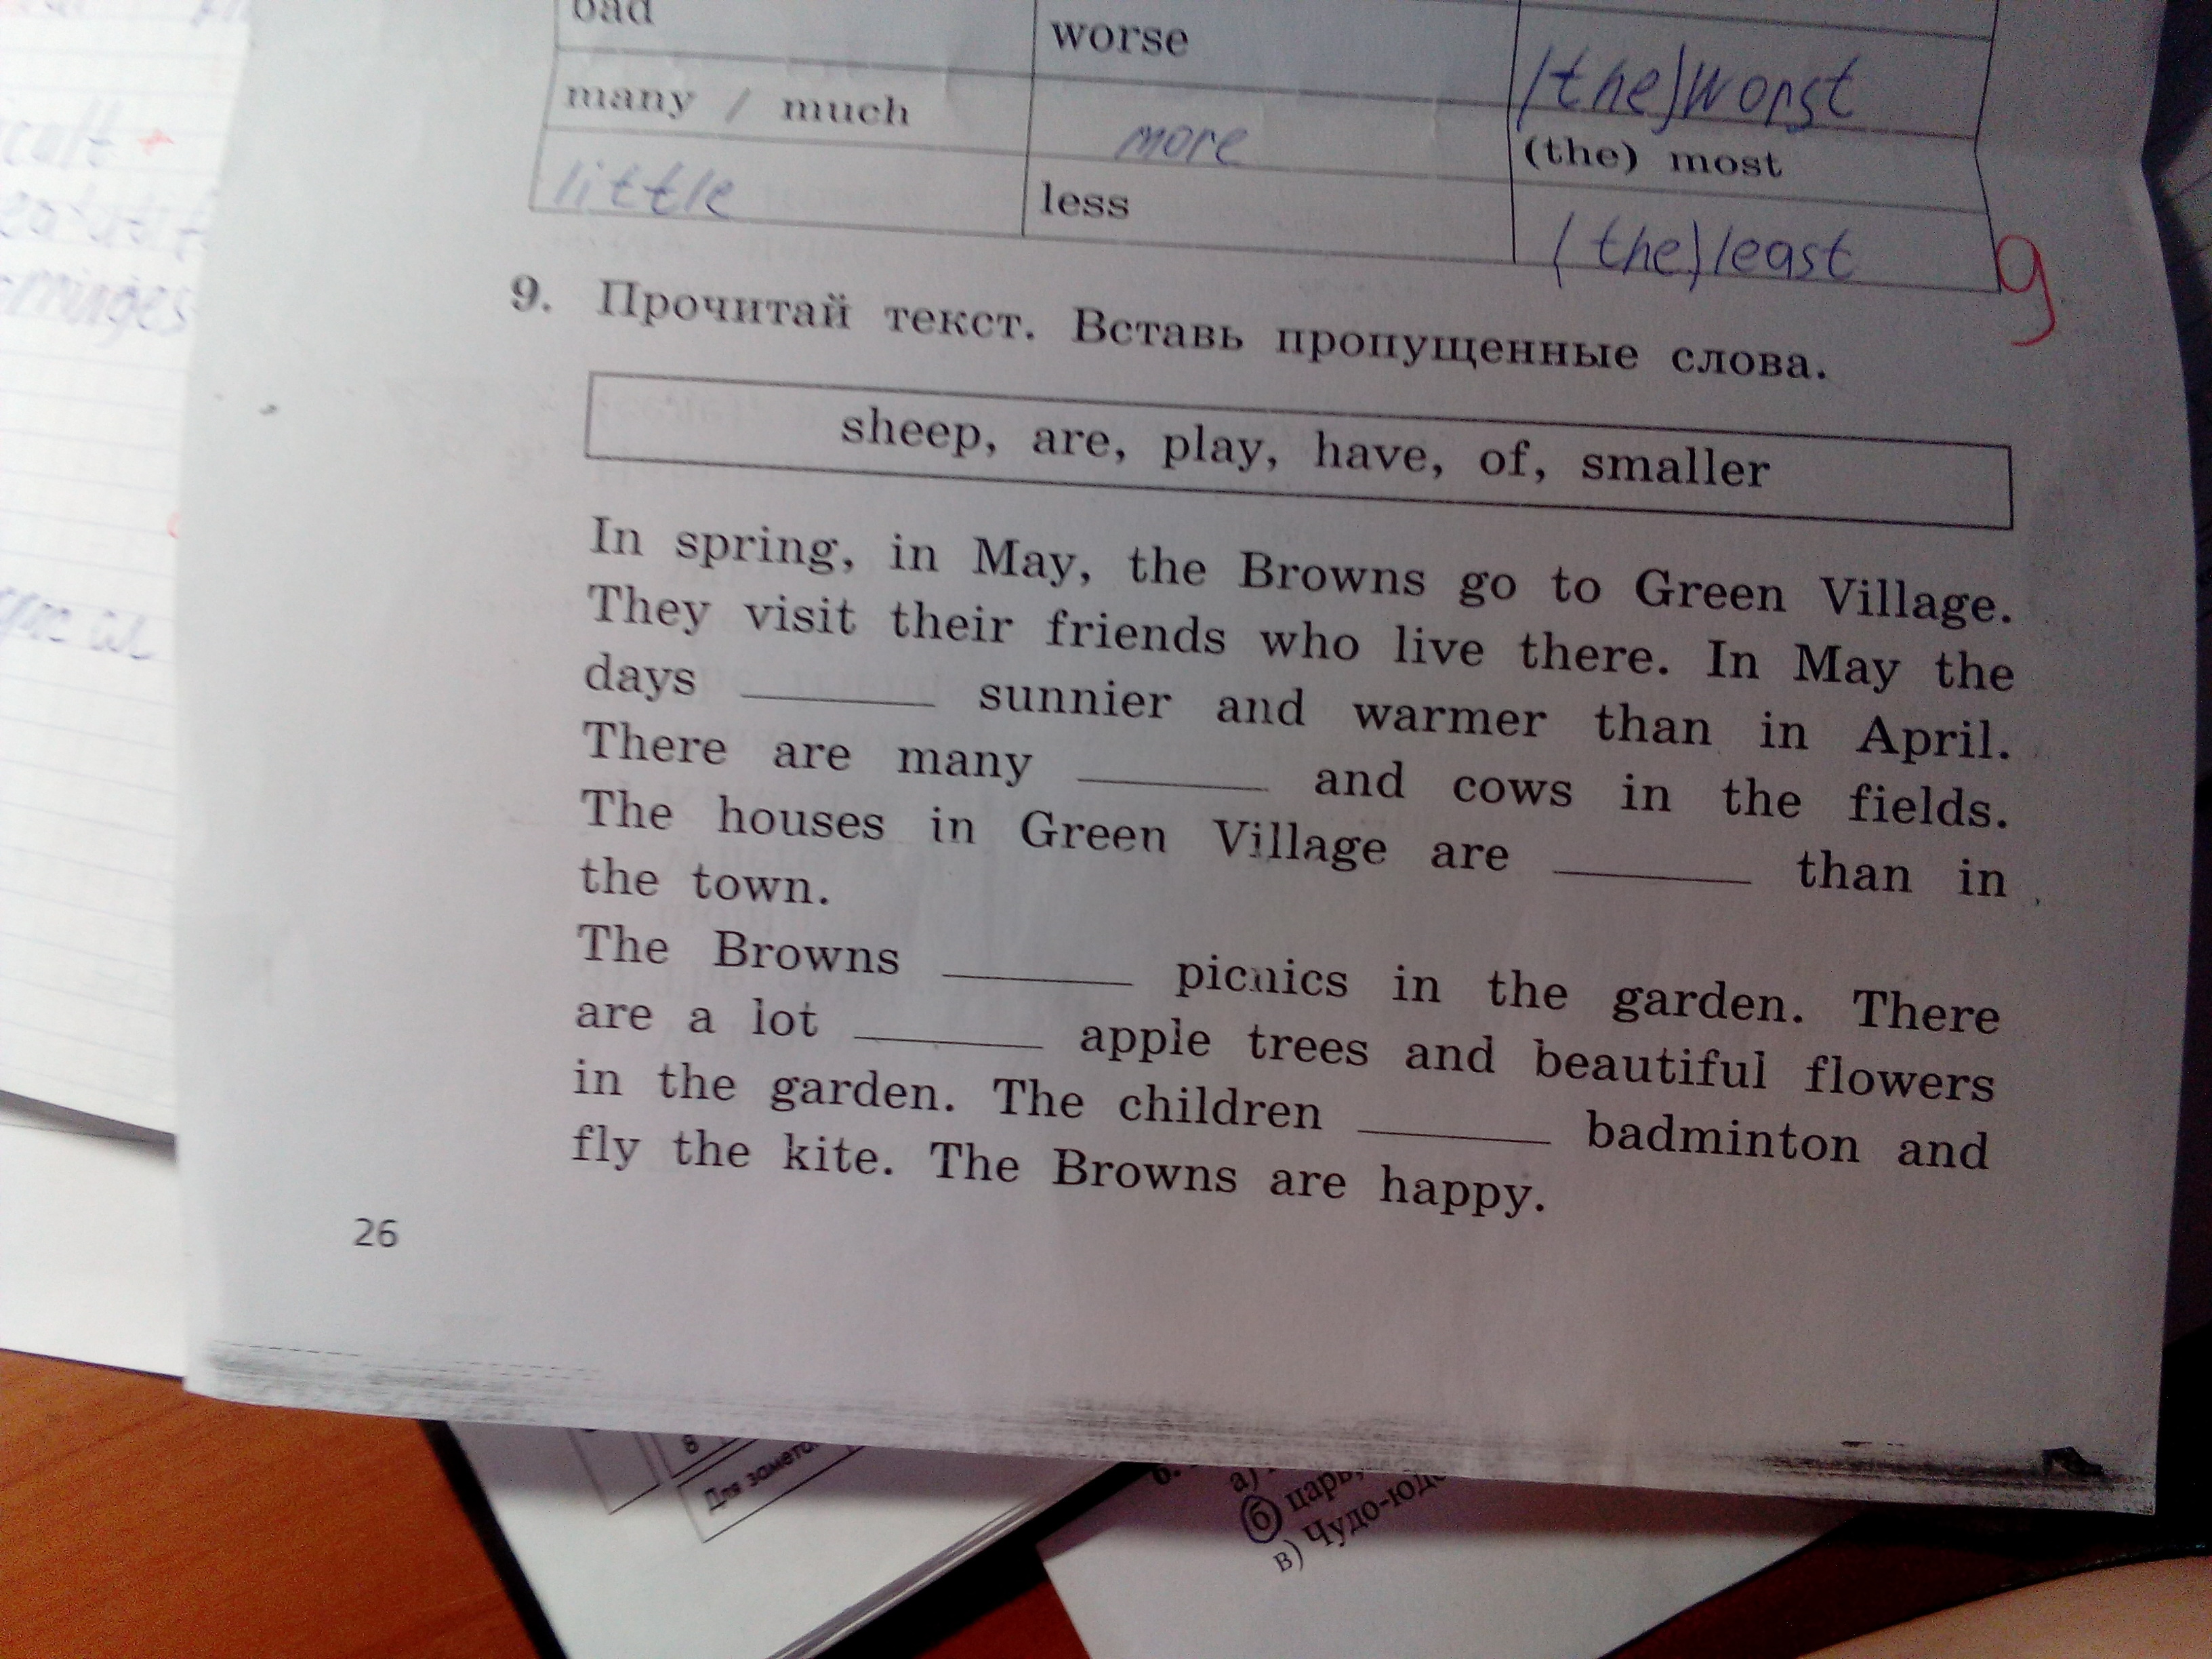 Заполнить недостающий текст. In Spring in May the Browns go to Green Village вставить пропущенные слова. Прочитай текст вставь пропущенные слова. Вставьте пропущенные слова was were. Вставьте пропущенные слова is and are and was and were.